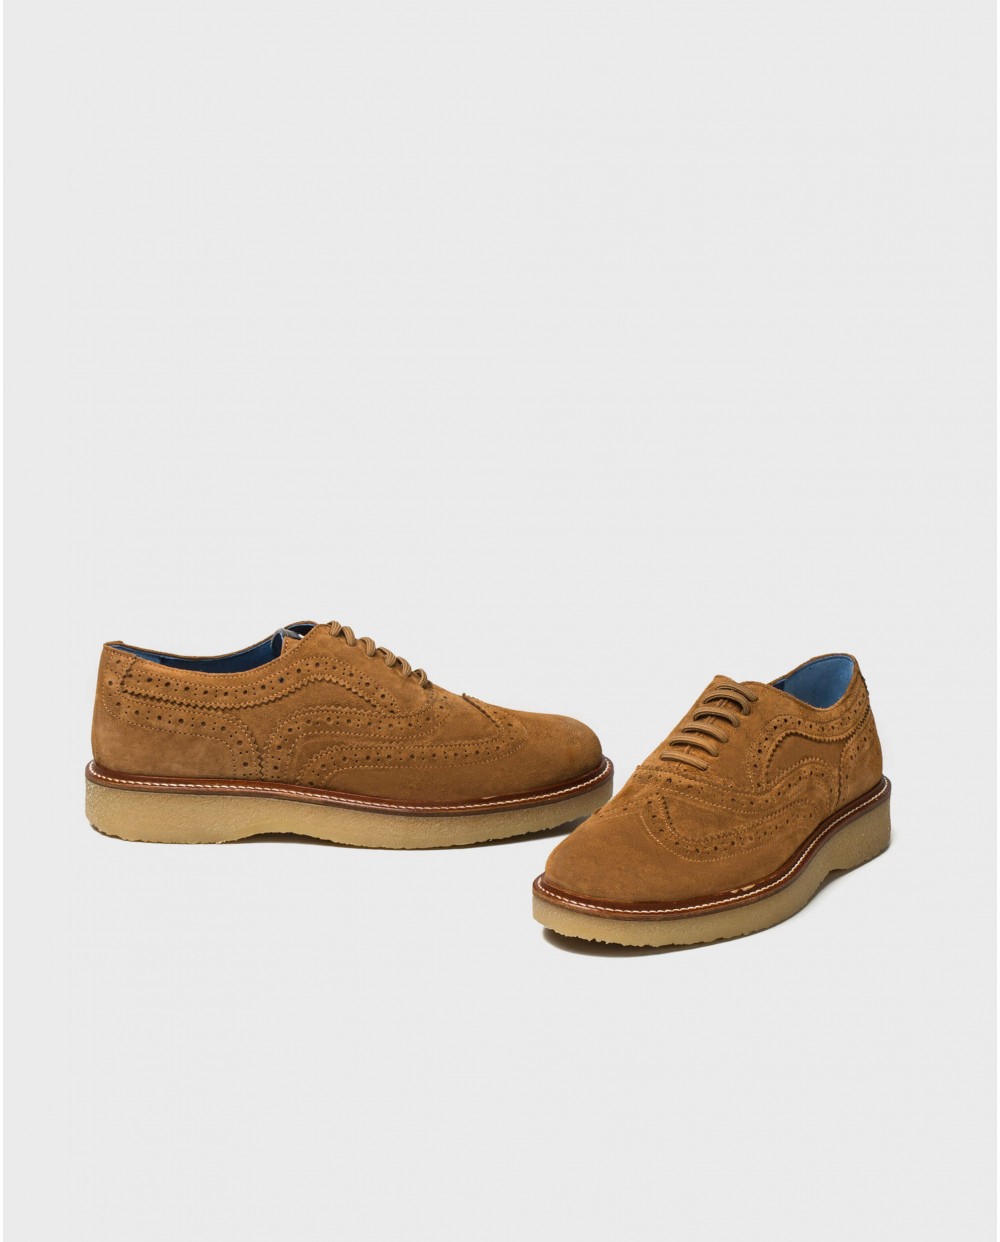 Wonders-Outlet-Zapato LORD Camel